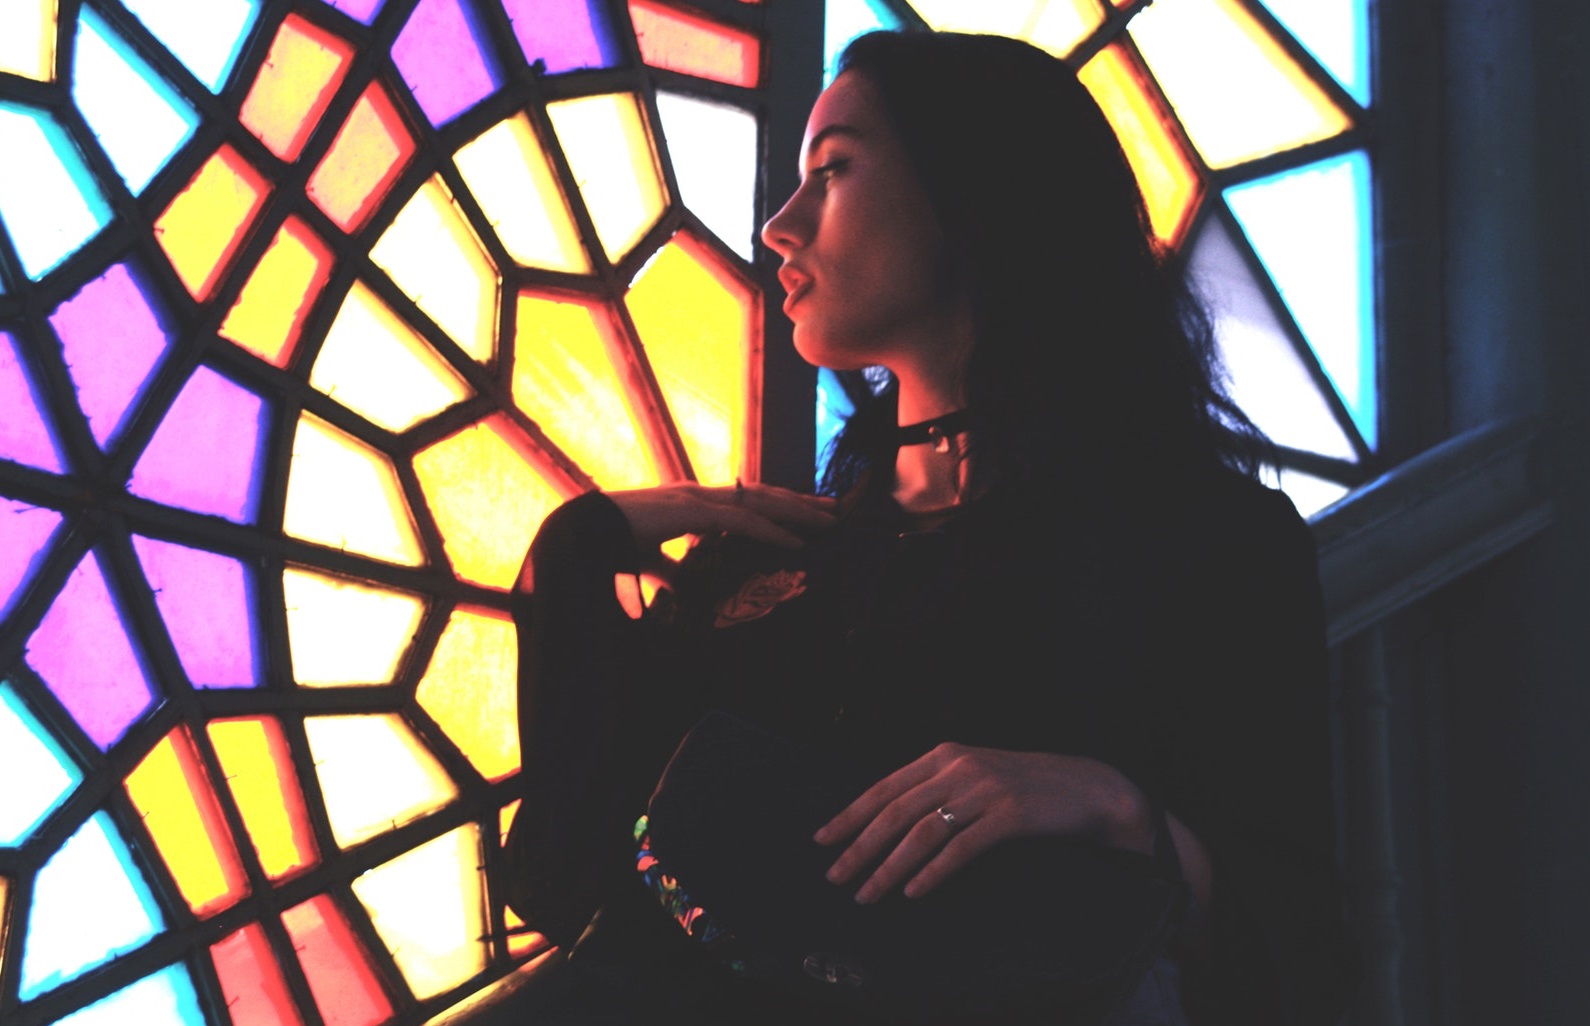 Beautiful young woman with dark hair looking at a backlit stained glass window